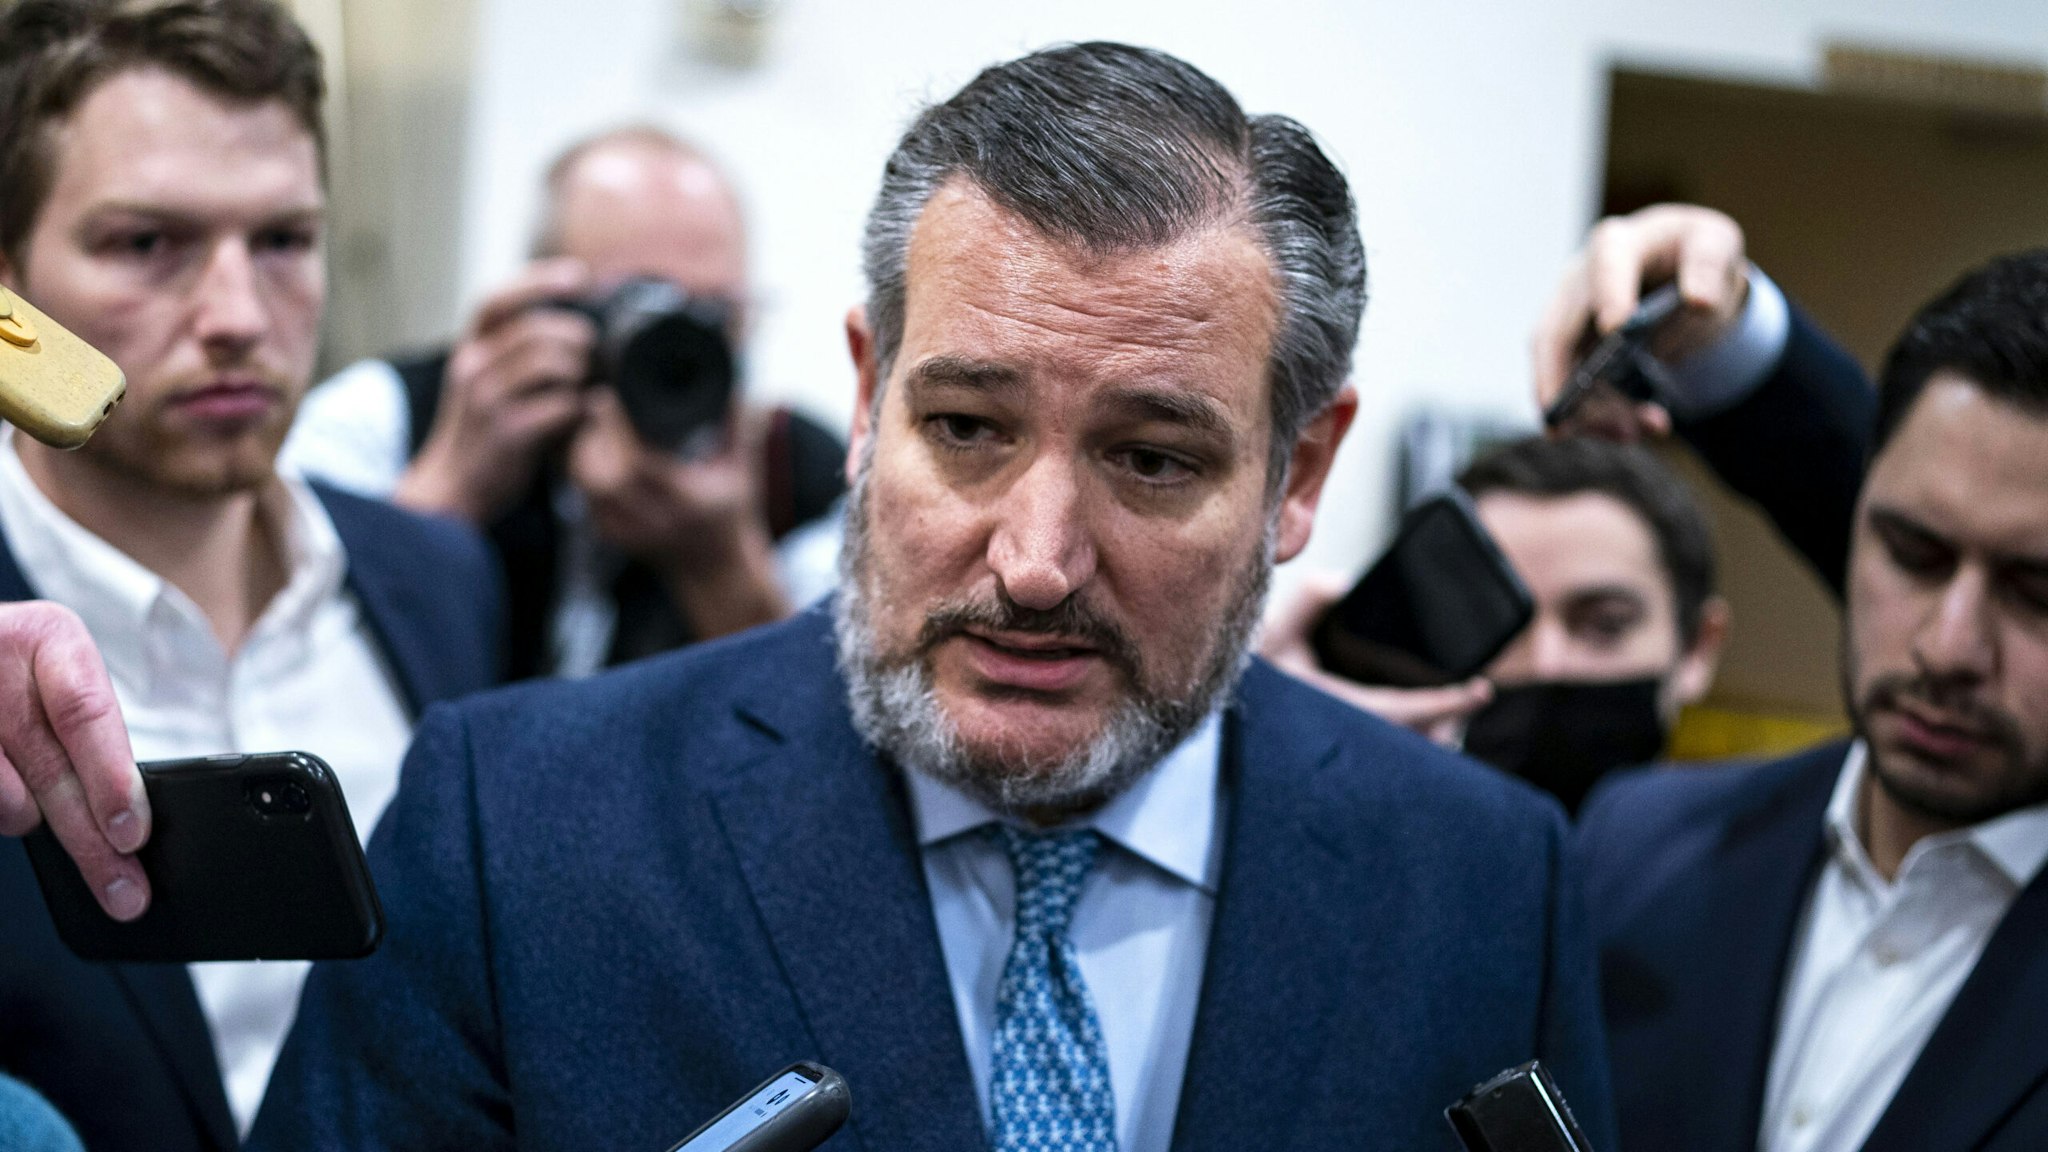 Senator Ted Cruz, a Republican from Texas, speaks with members of the media while arriving for a vote in the U.S. Capitol in Washington, D.C., U.S., on Thursday, Dec. 2, 2021. House Democrats released a bipartisan short-term spending bill to keep the government open after midnight Friday and plan to put it to a House vote later today.